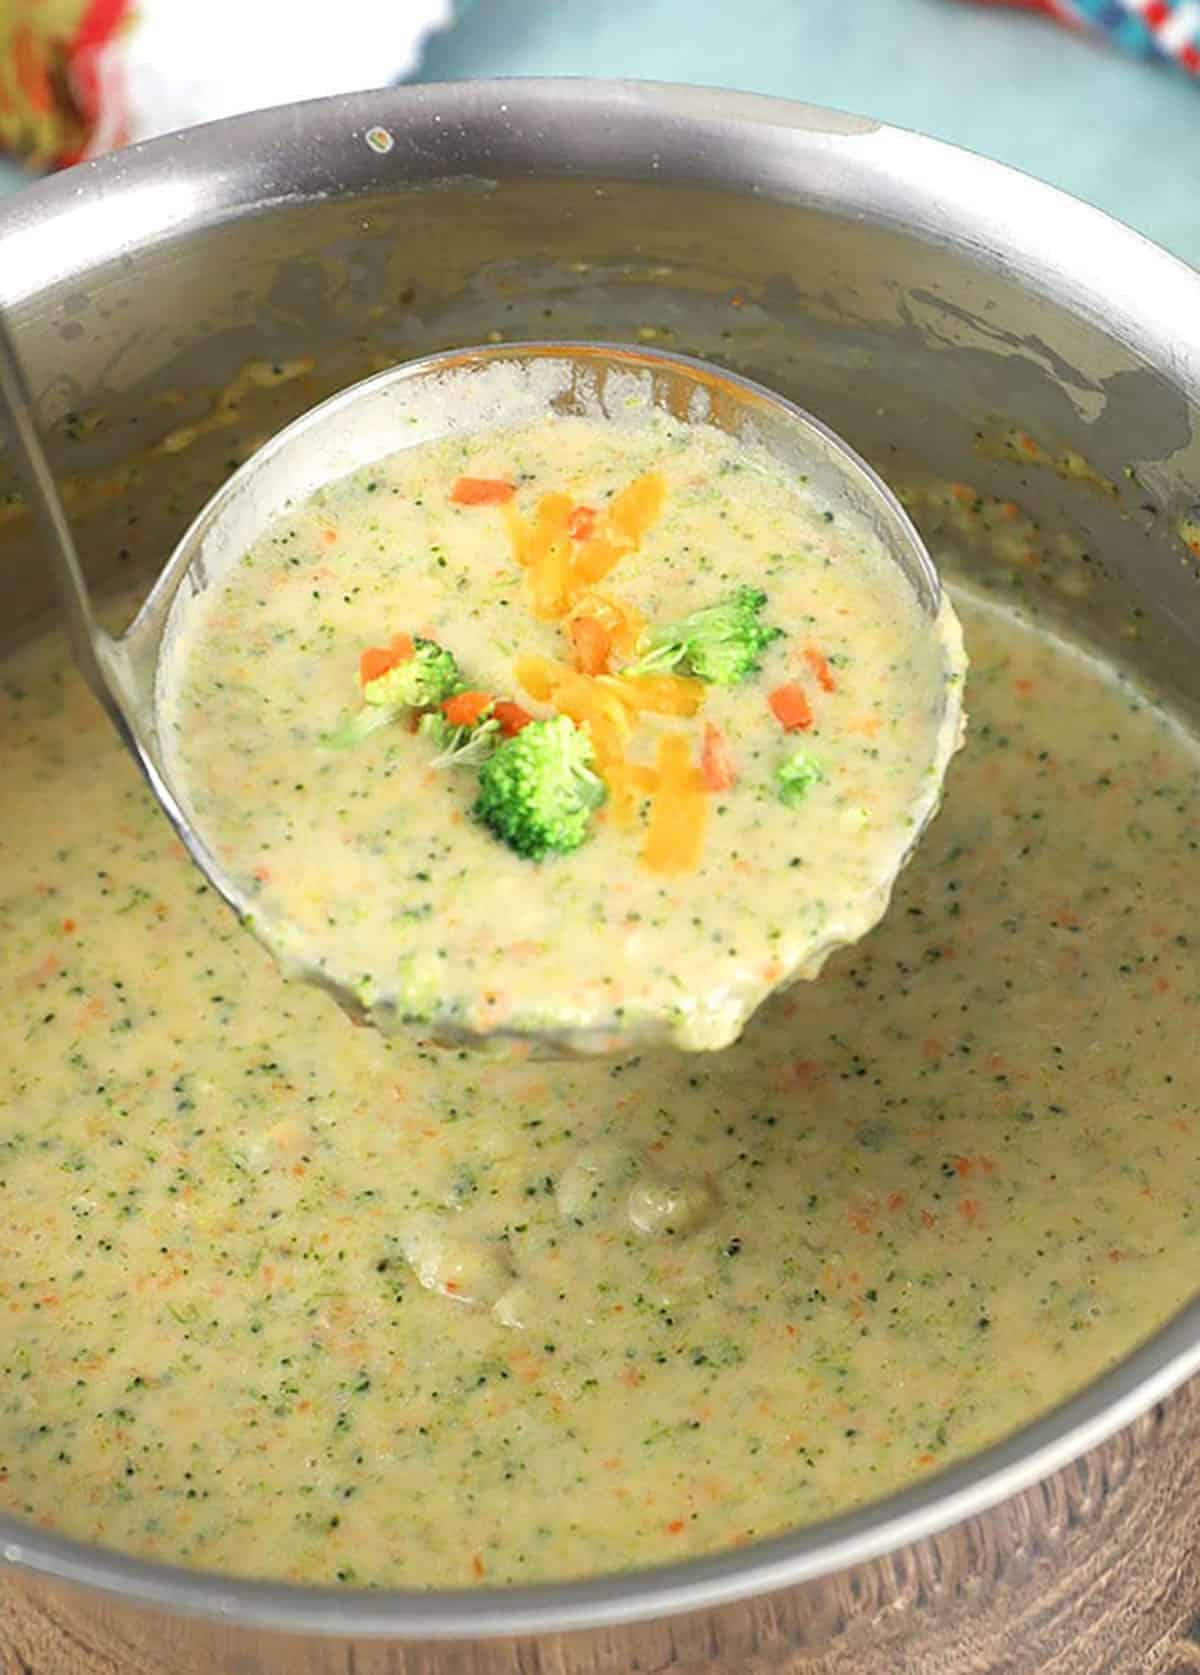 Big pot of broccoli cheddar soup with a ladle scooping a serving.